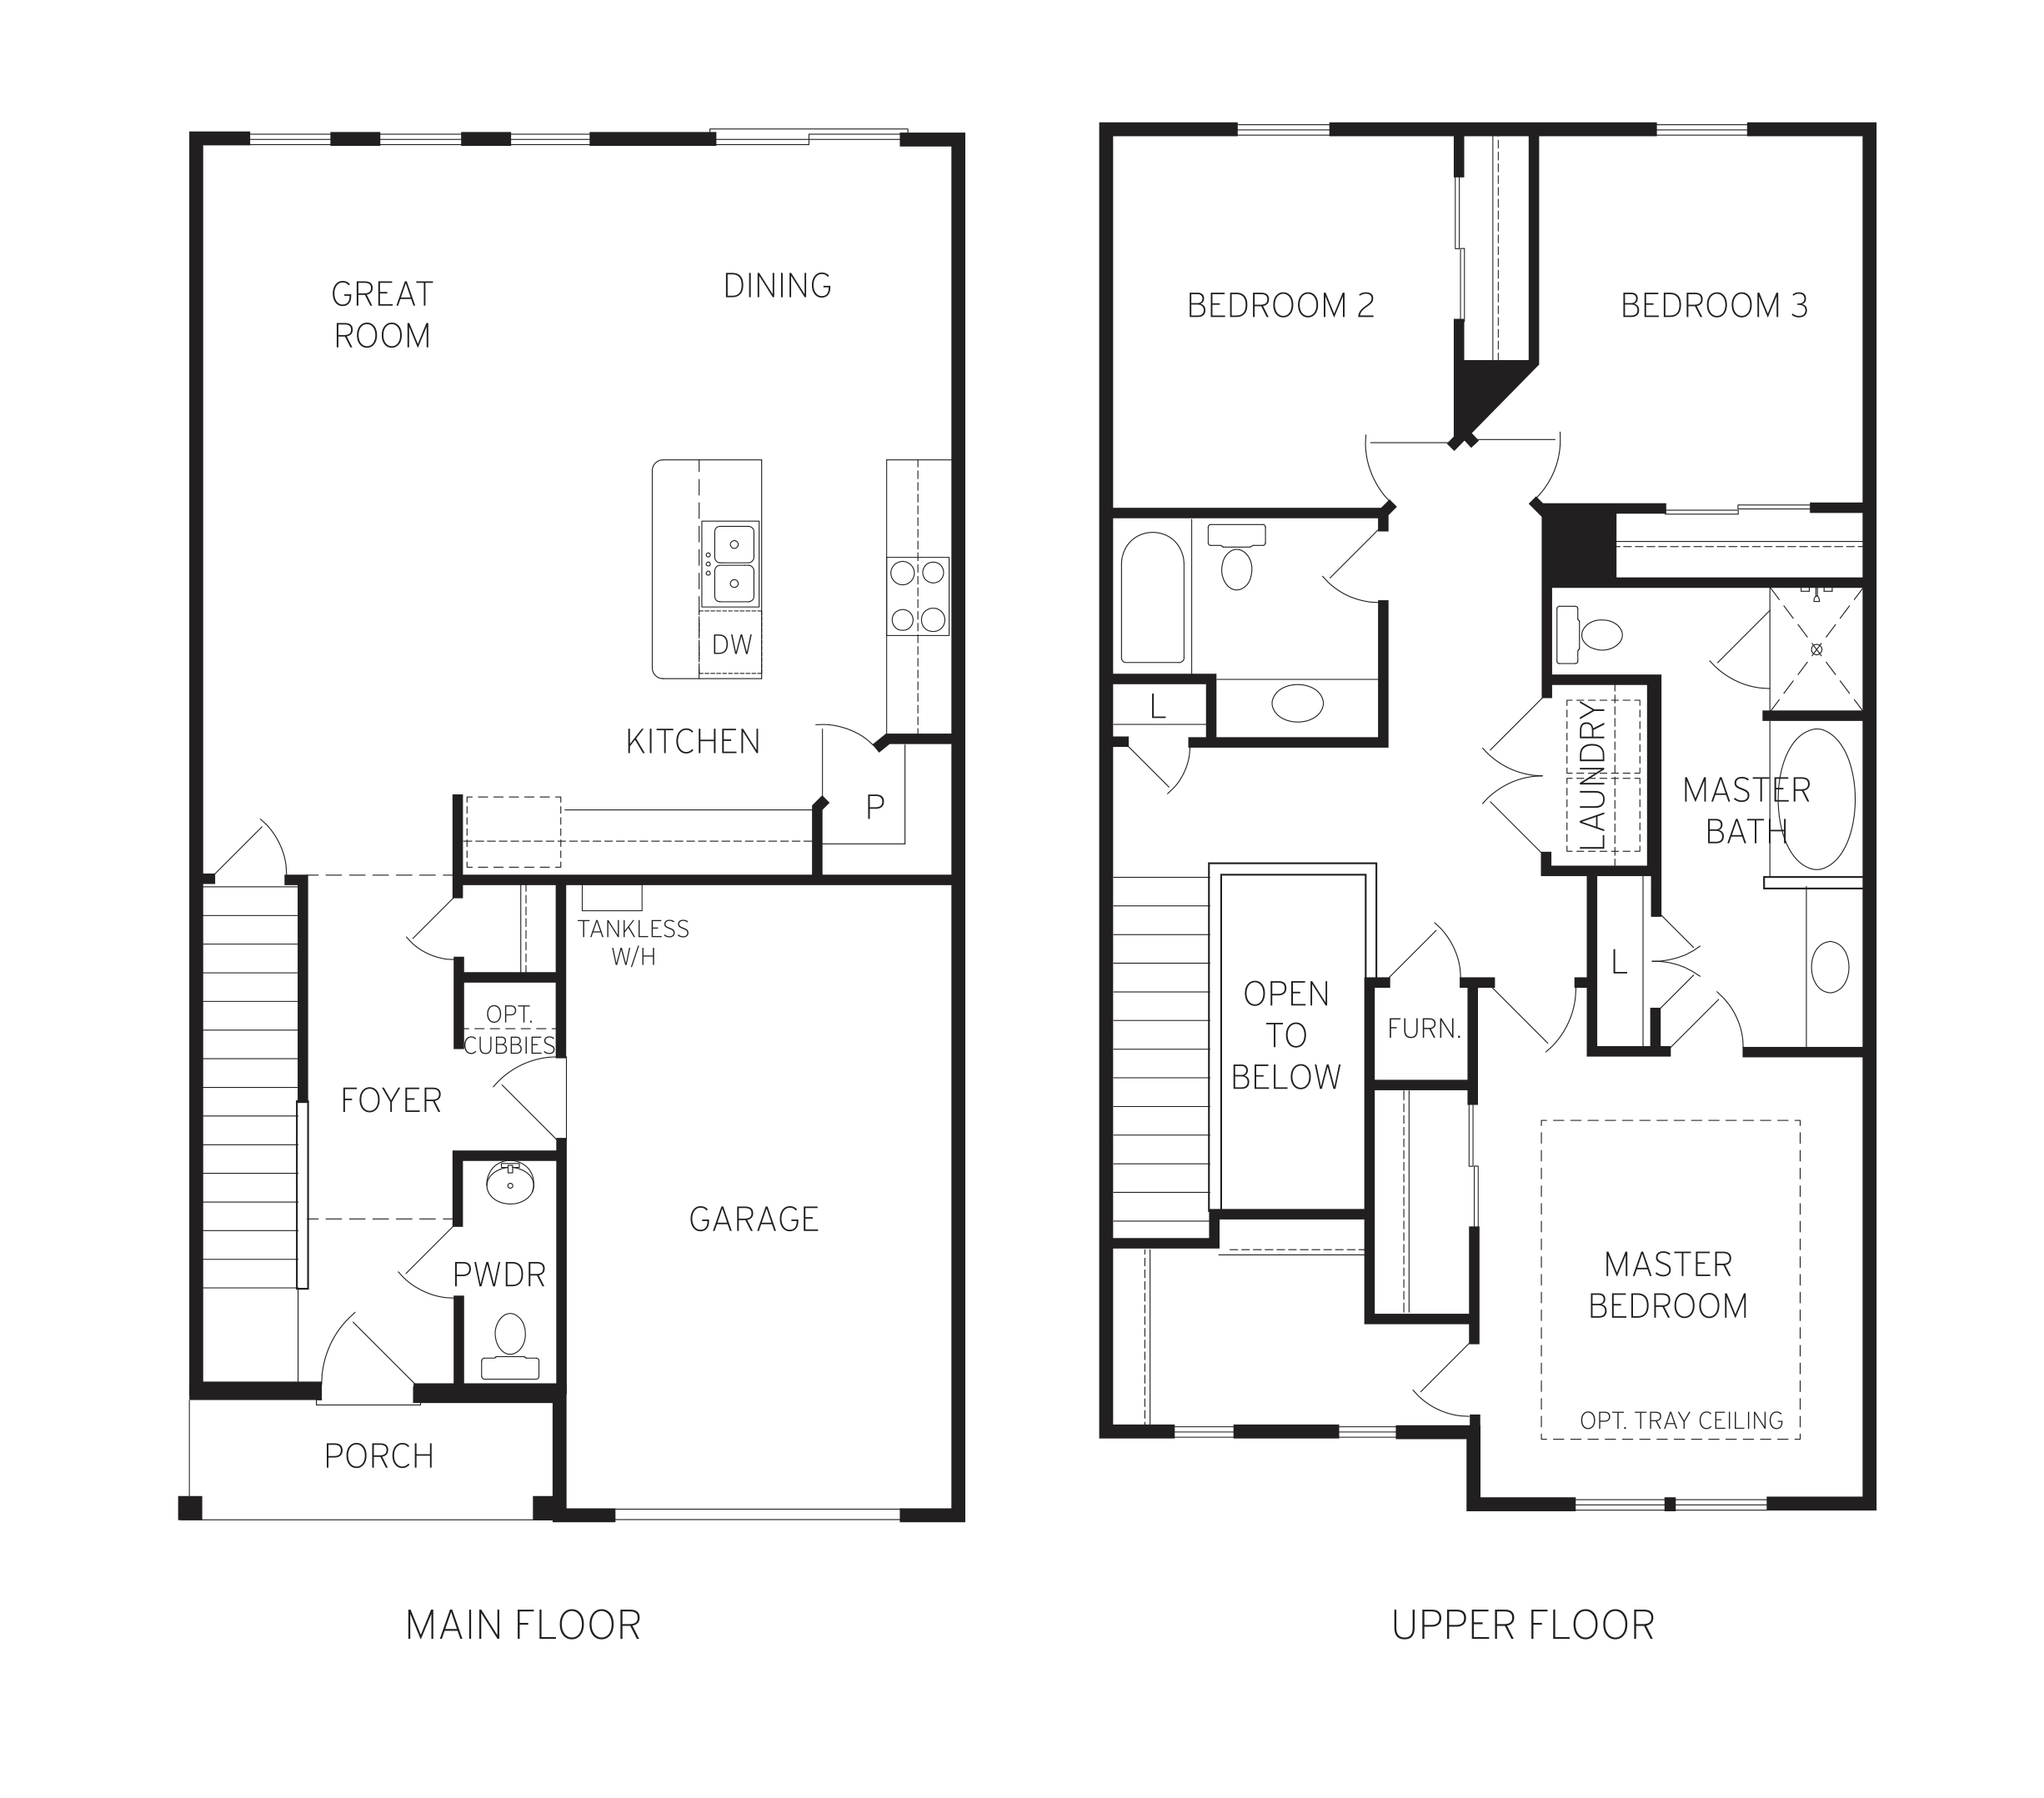 Floor Plan Residence A Floor Plan (1784 sq ft, 3 beds) at